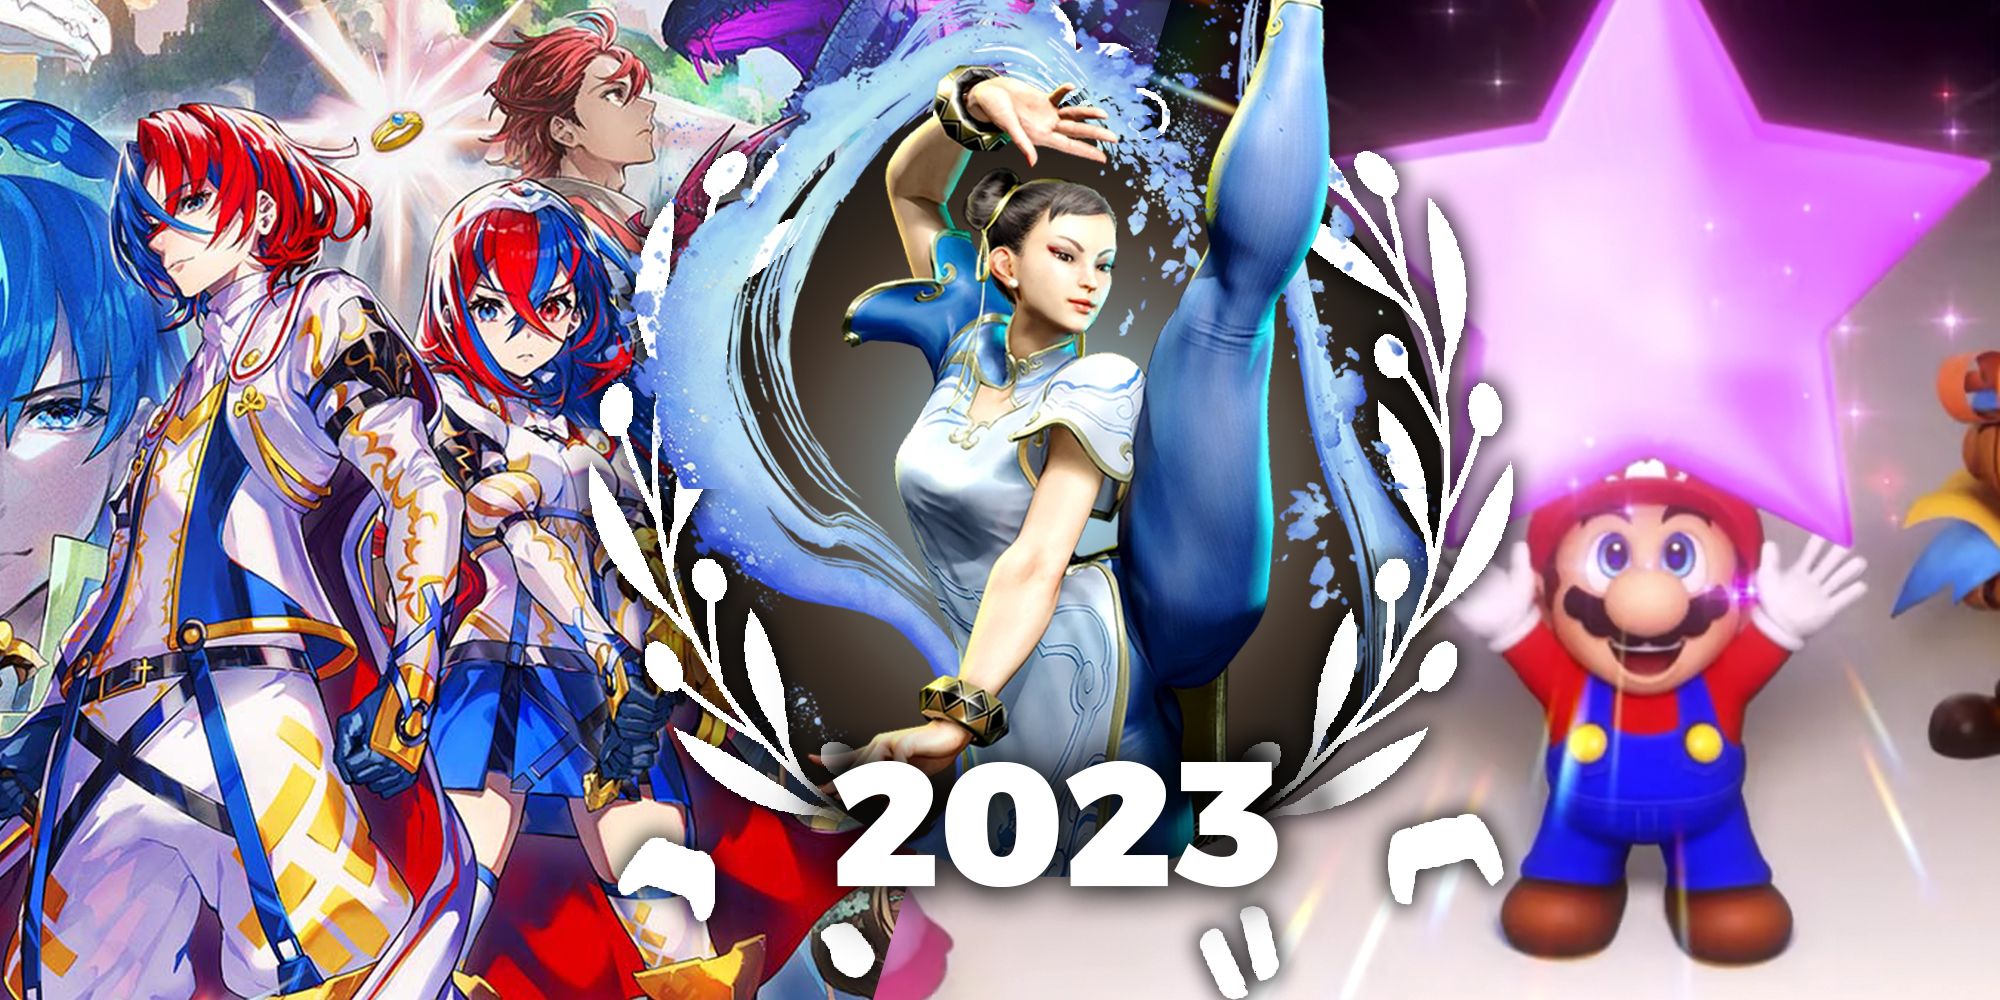 Jerel Levy 2023 Game of the year GOTY feature image with Fire Emblem Engage, Street Fighter 6 and super Mario RPG images